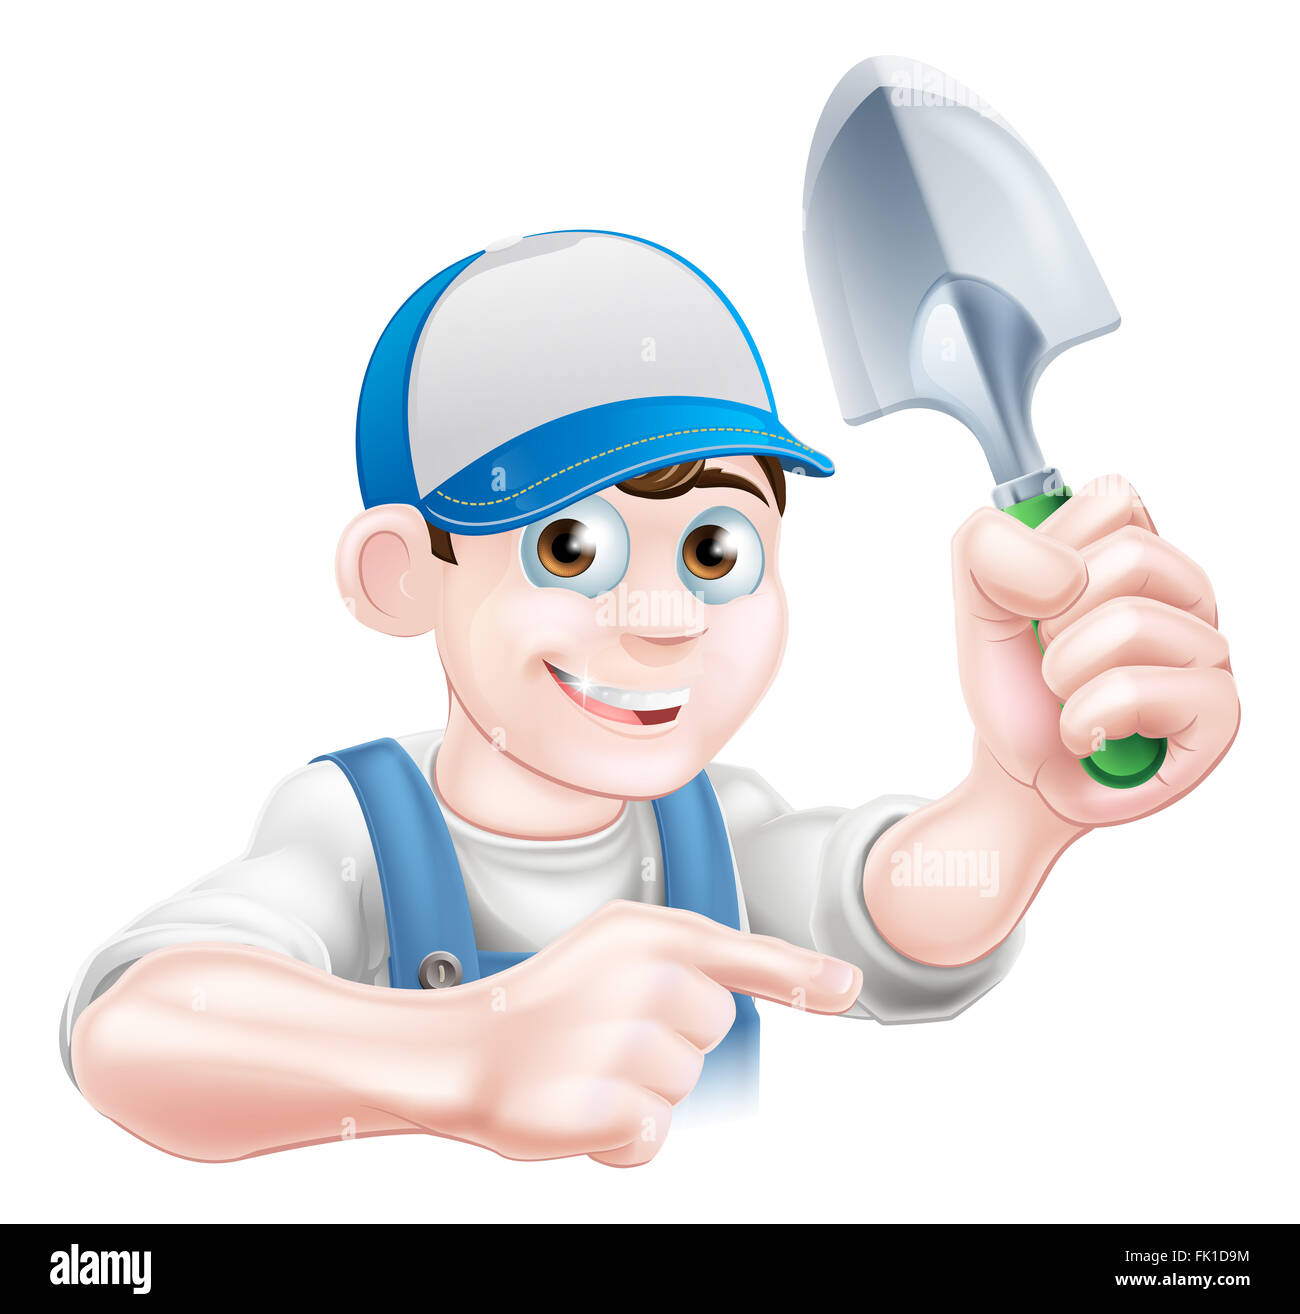 A cartoon gardener character in a cap and blue dungarees holding a garden trowel tool and pointing Stock Photo